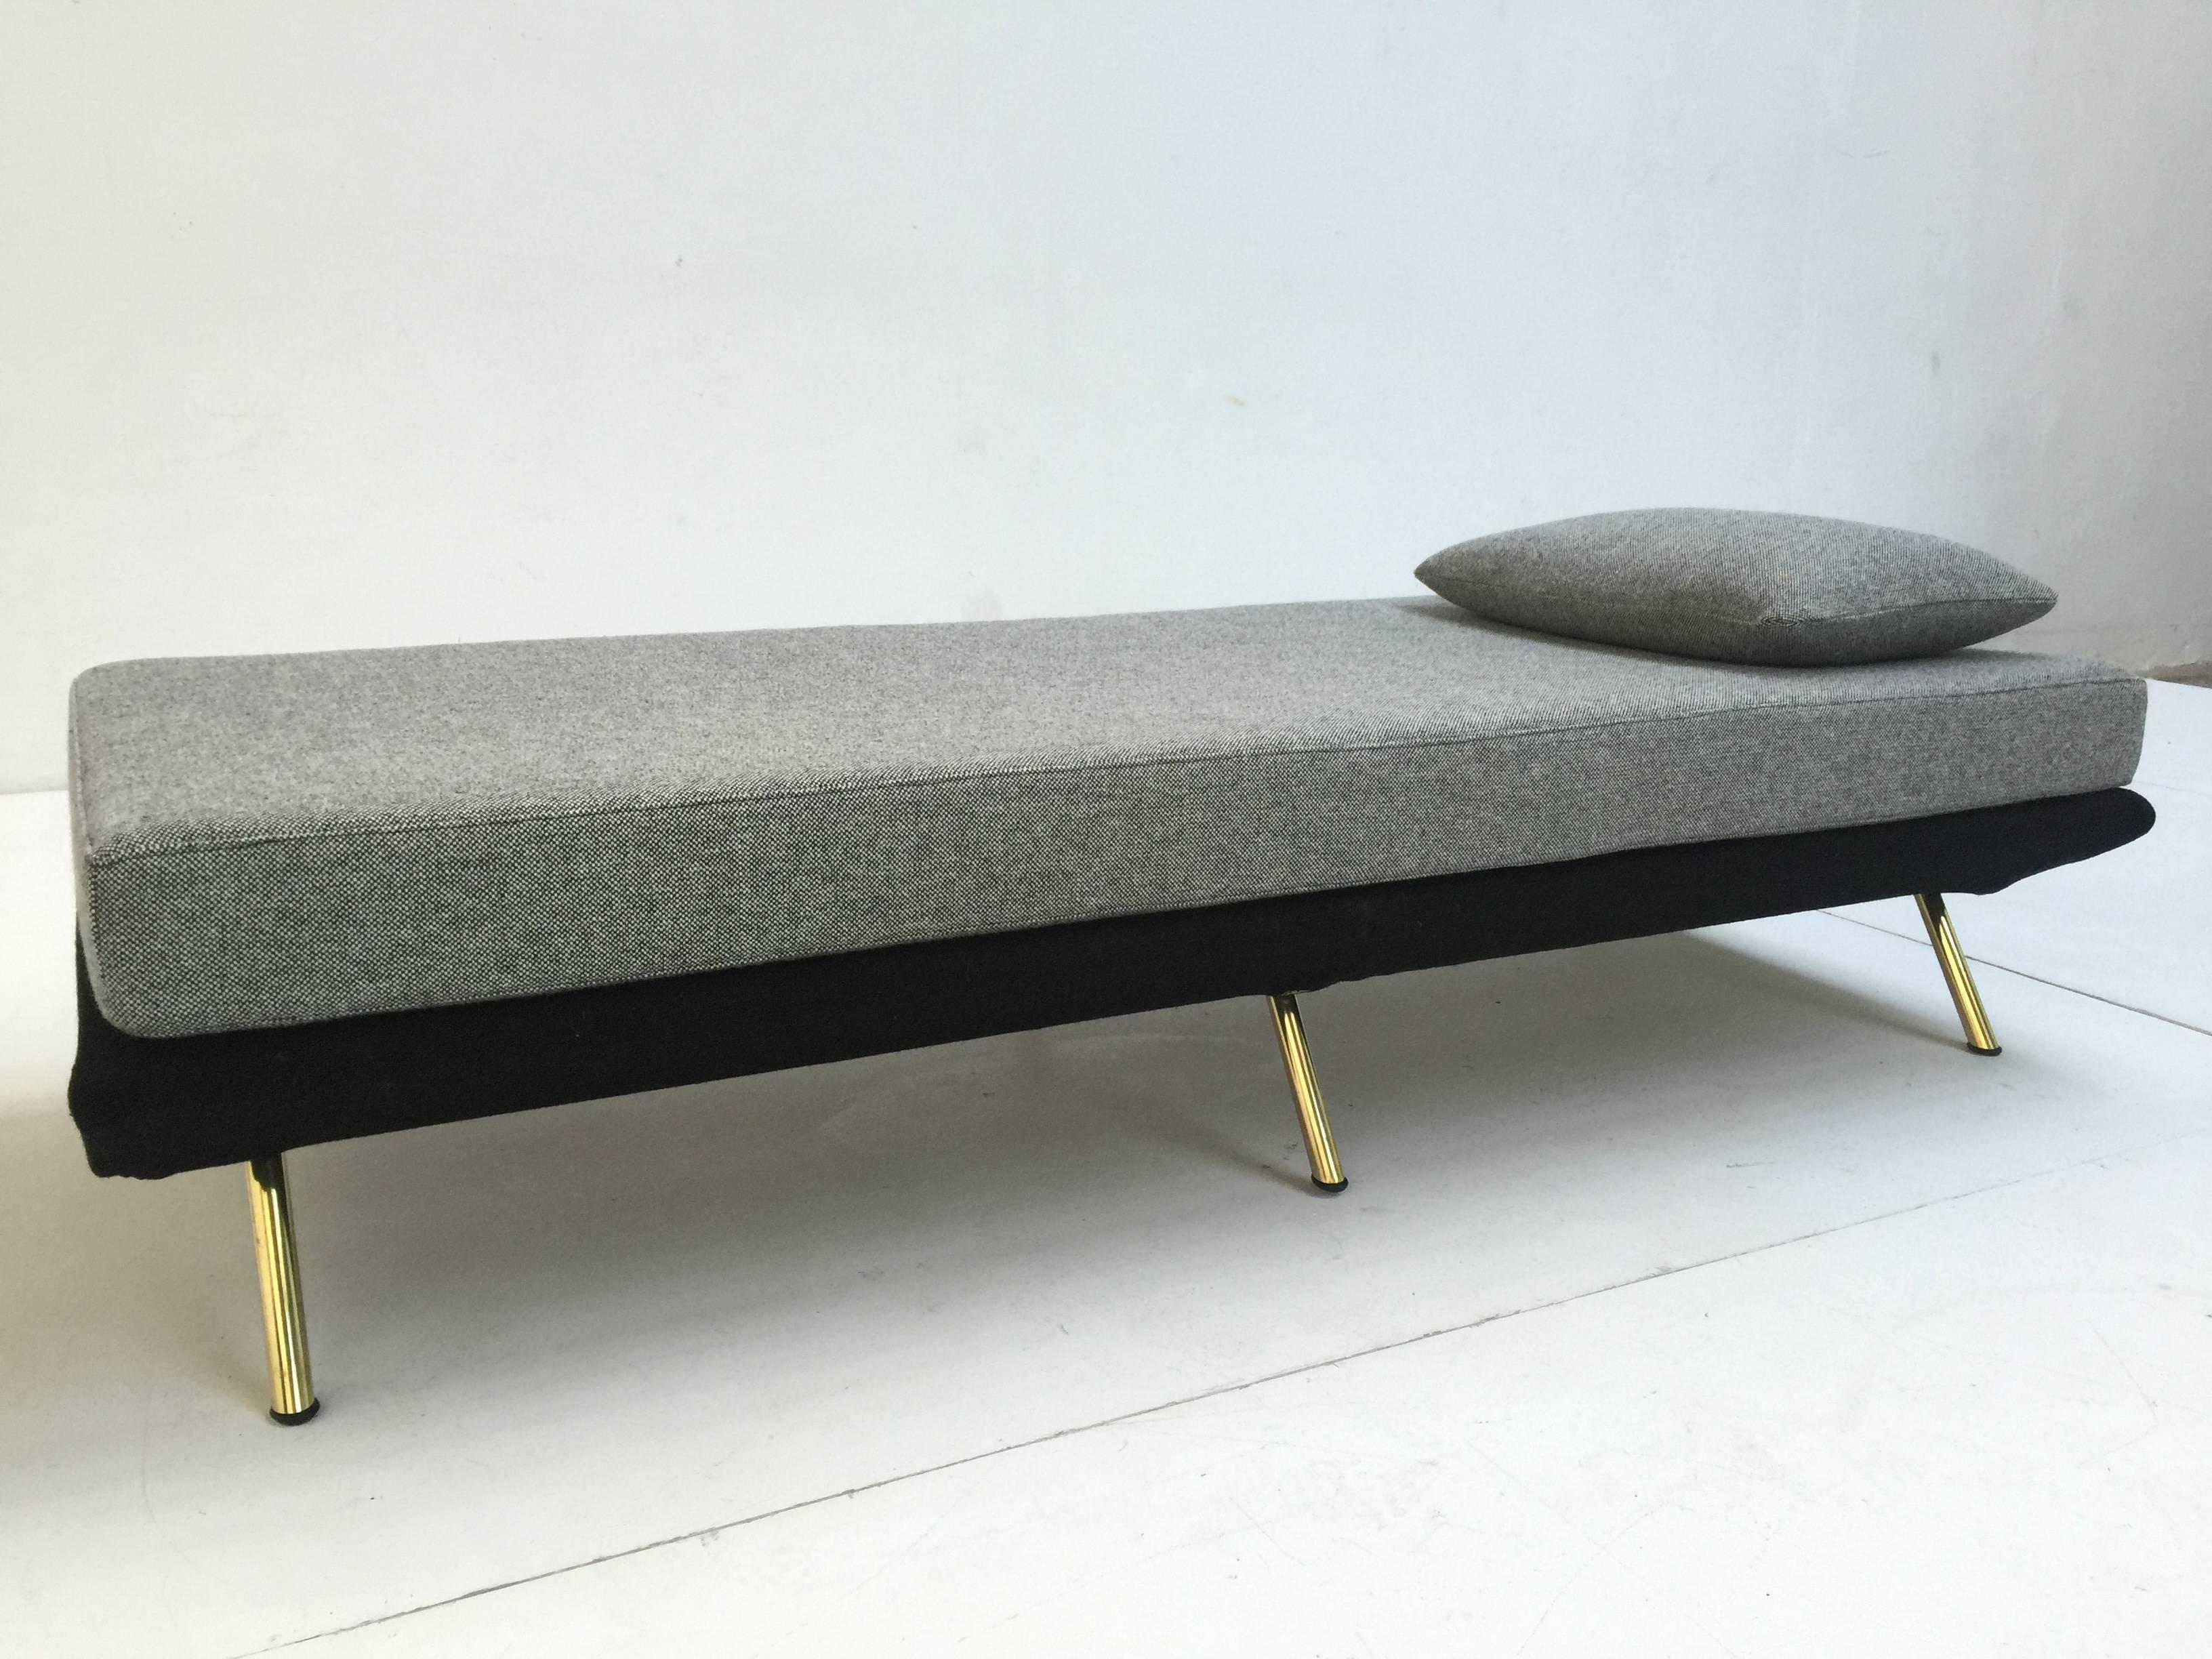 Enameled Rare, Fully Restored Zanuso 'Triennale' Daybed, 1951 Published in Arflex Catalog